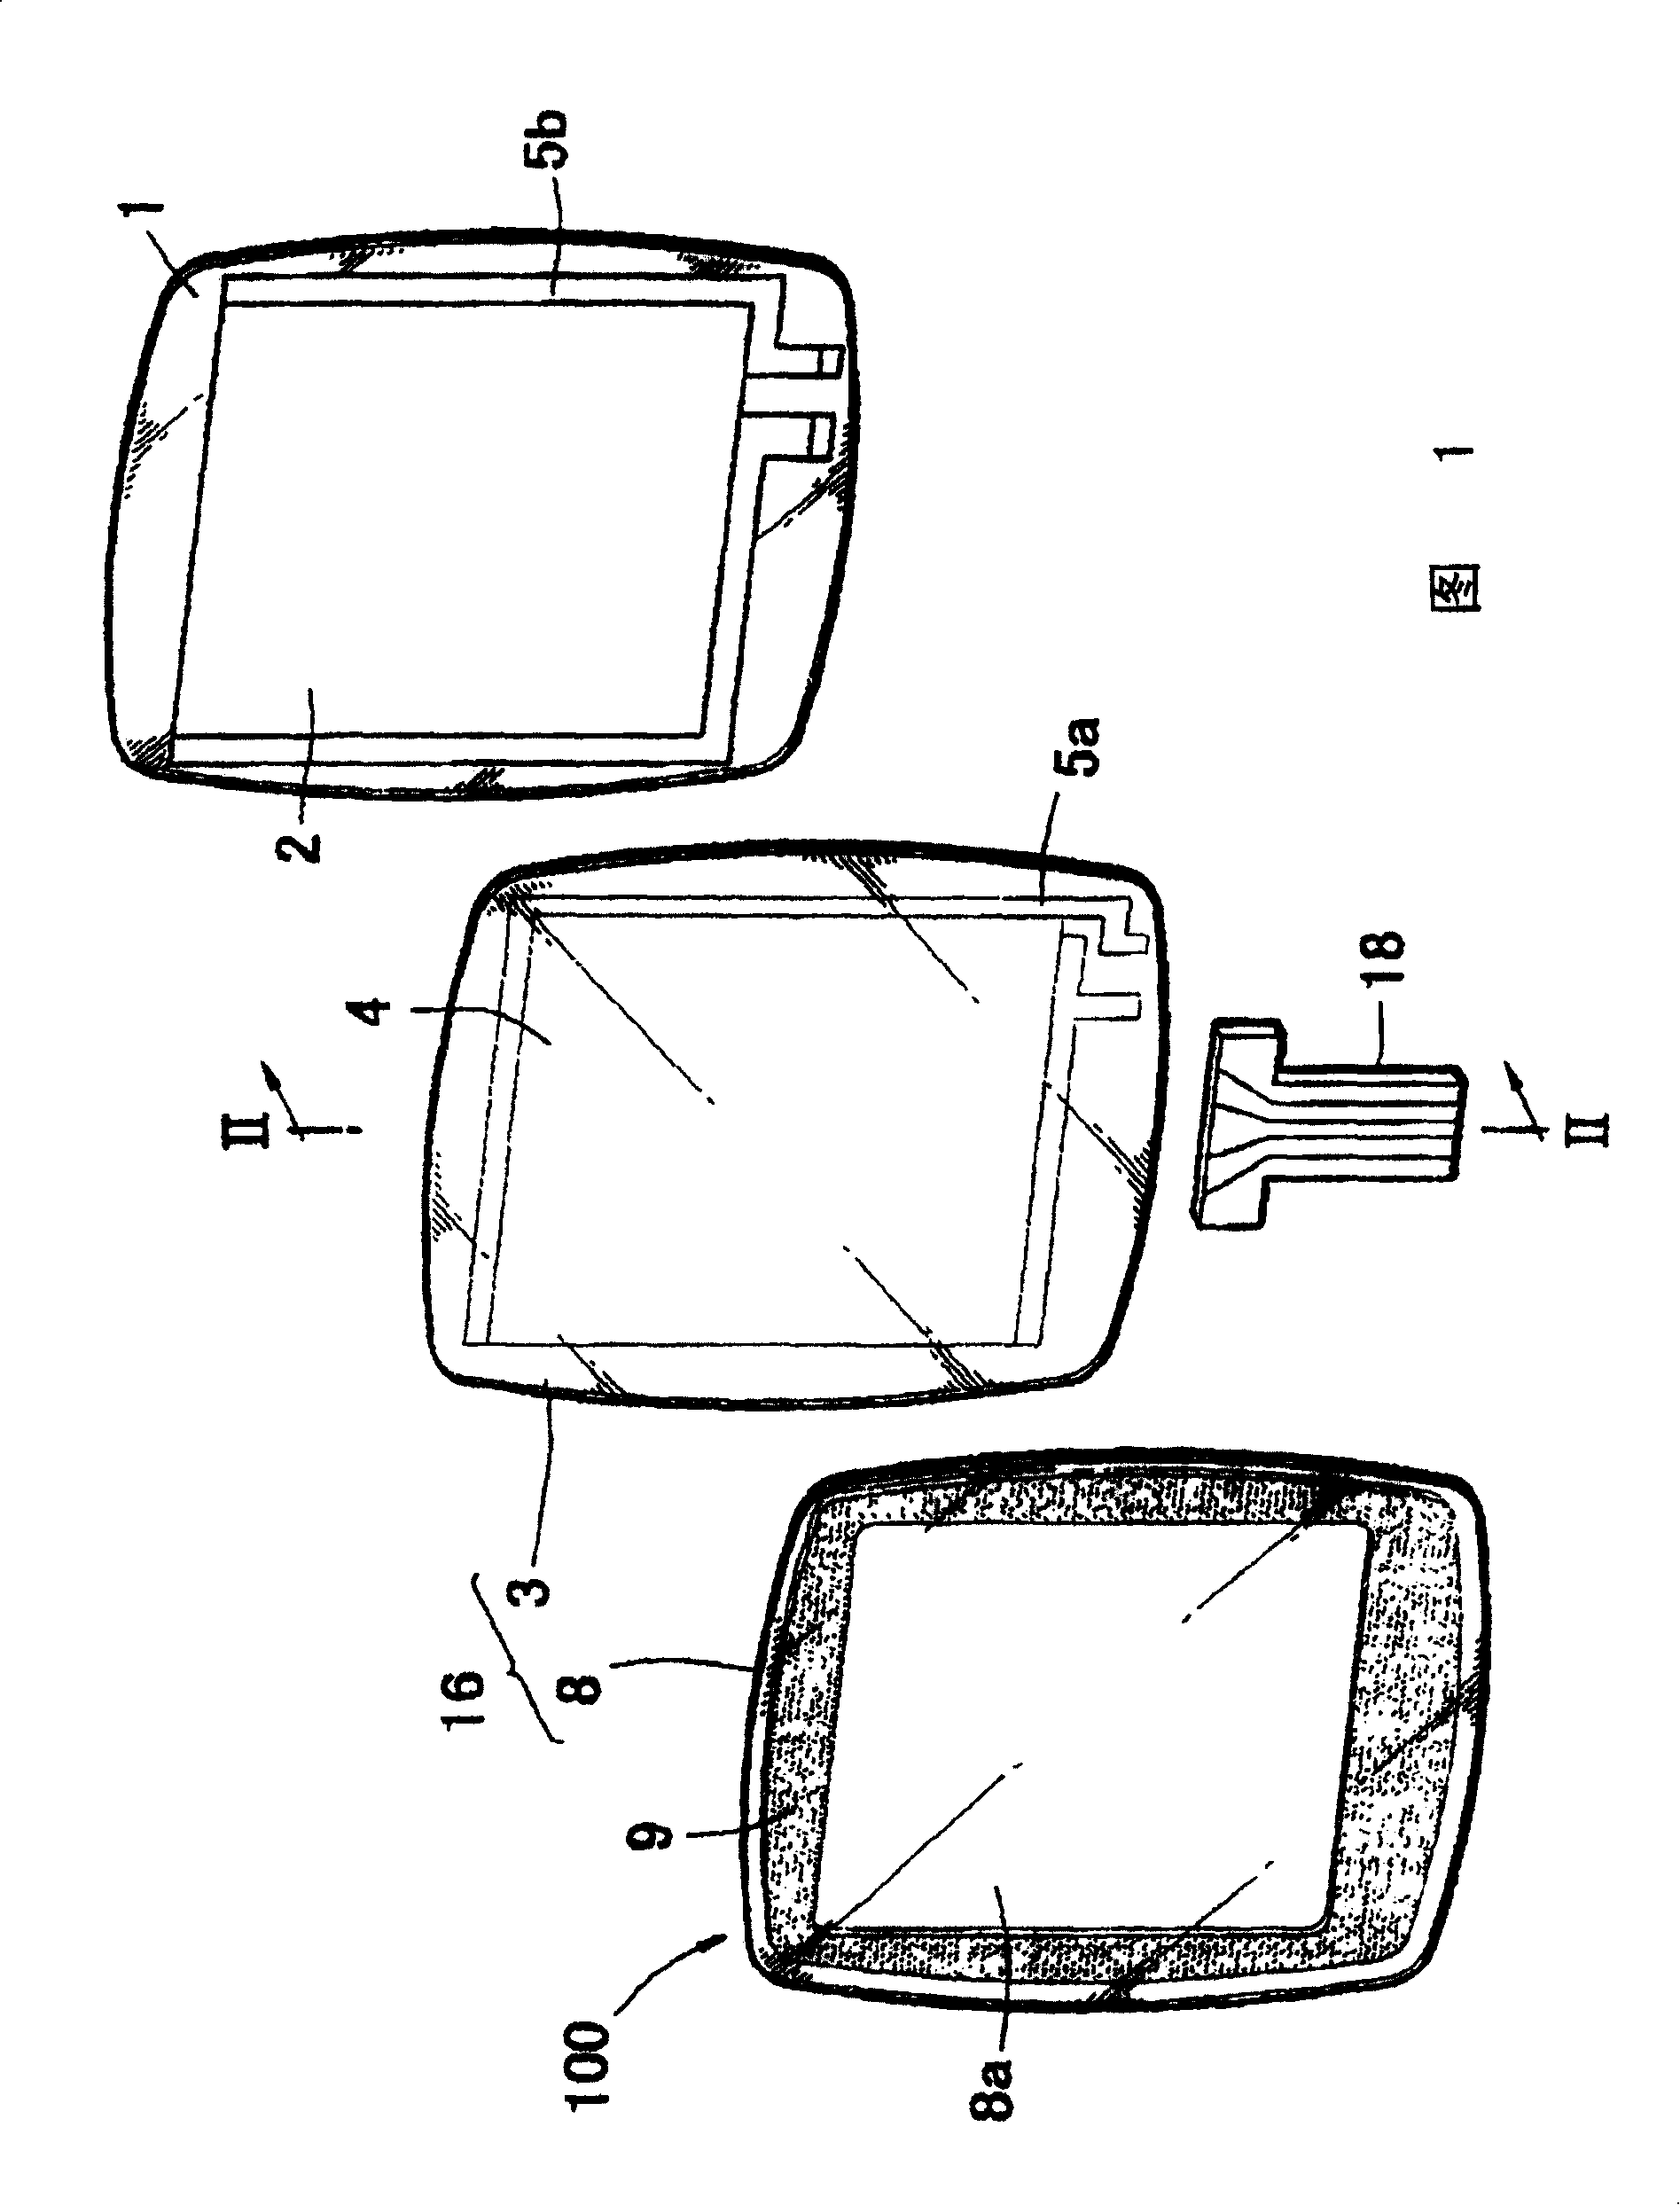 Electronic apparatus with protection panel, protection panel, and method of producing protection panel